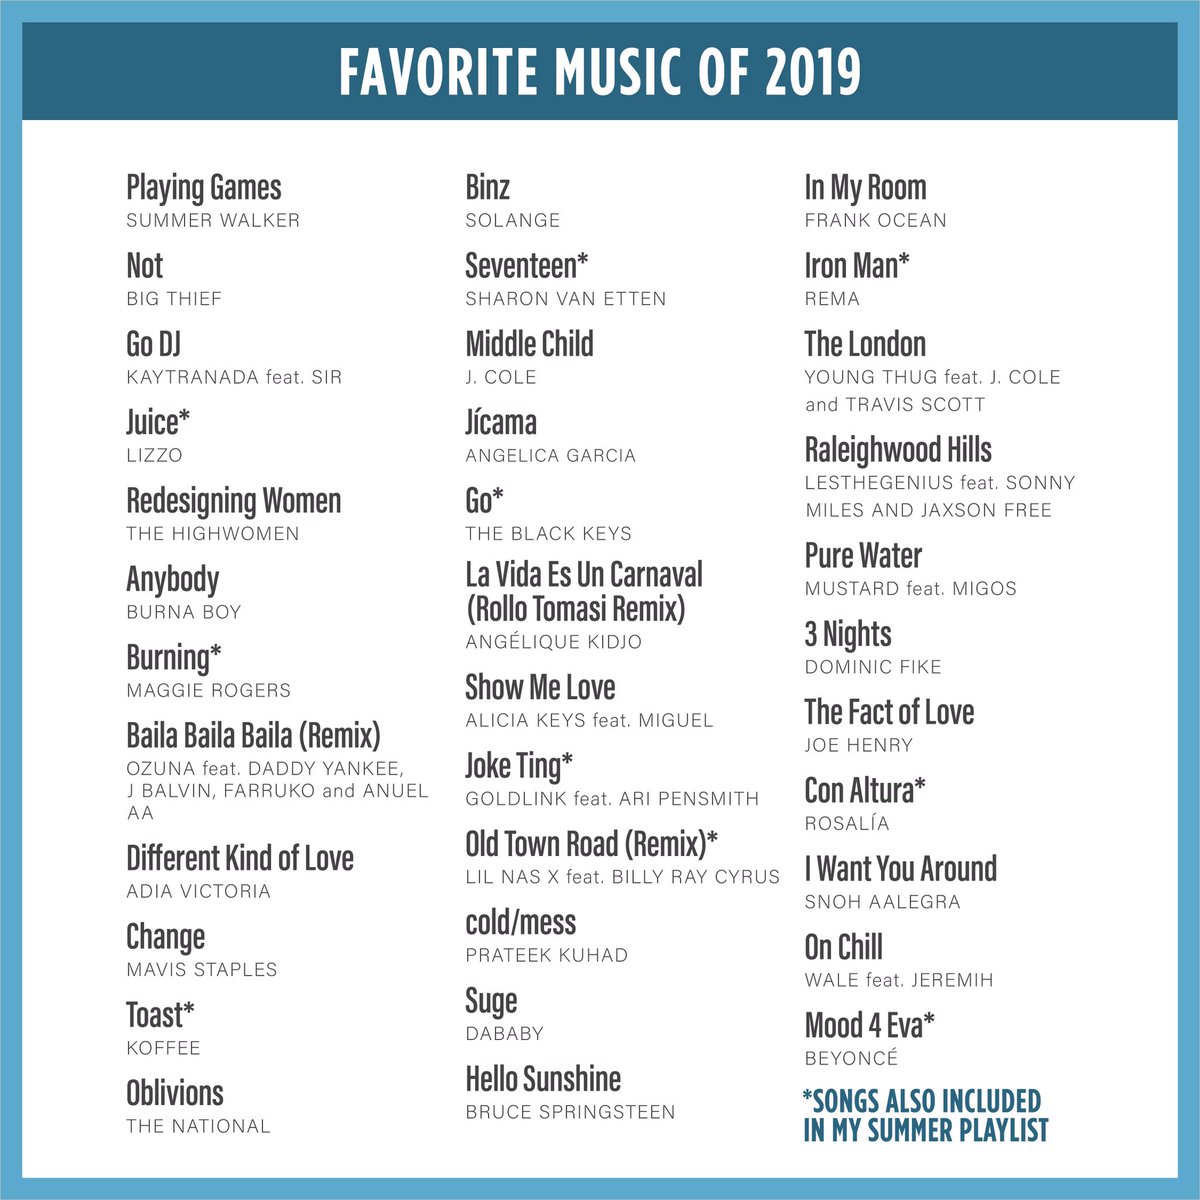 From hip-hop to country to The Boss, here are my songs of the year. If you’re looking for something to keep you company on a long drive or help you turn up a workout, I hope there’s a track or two in here that does the trick.